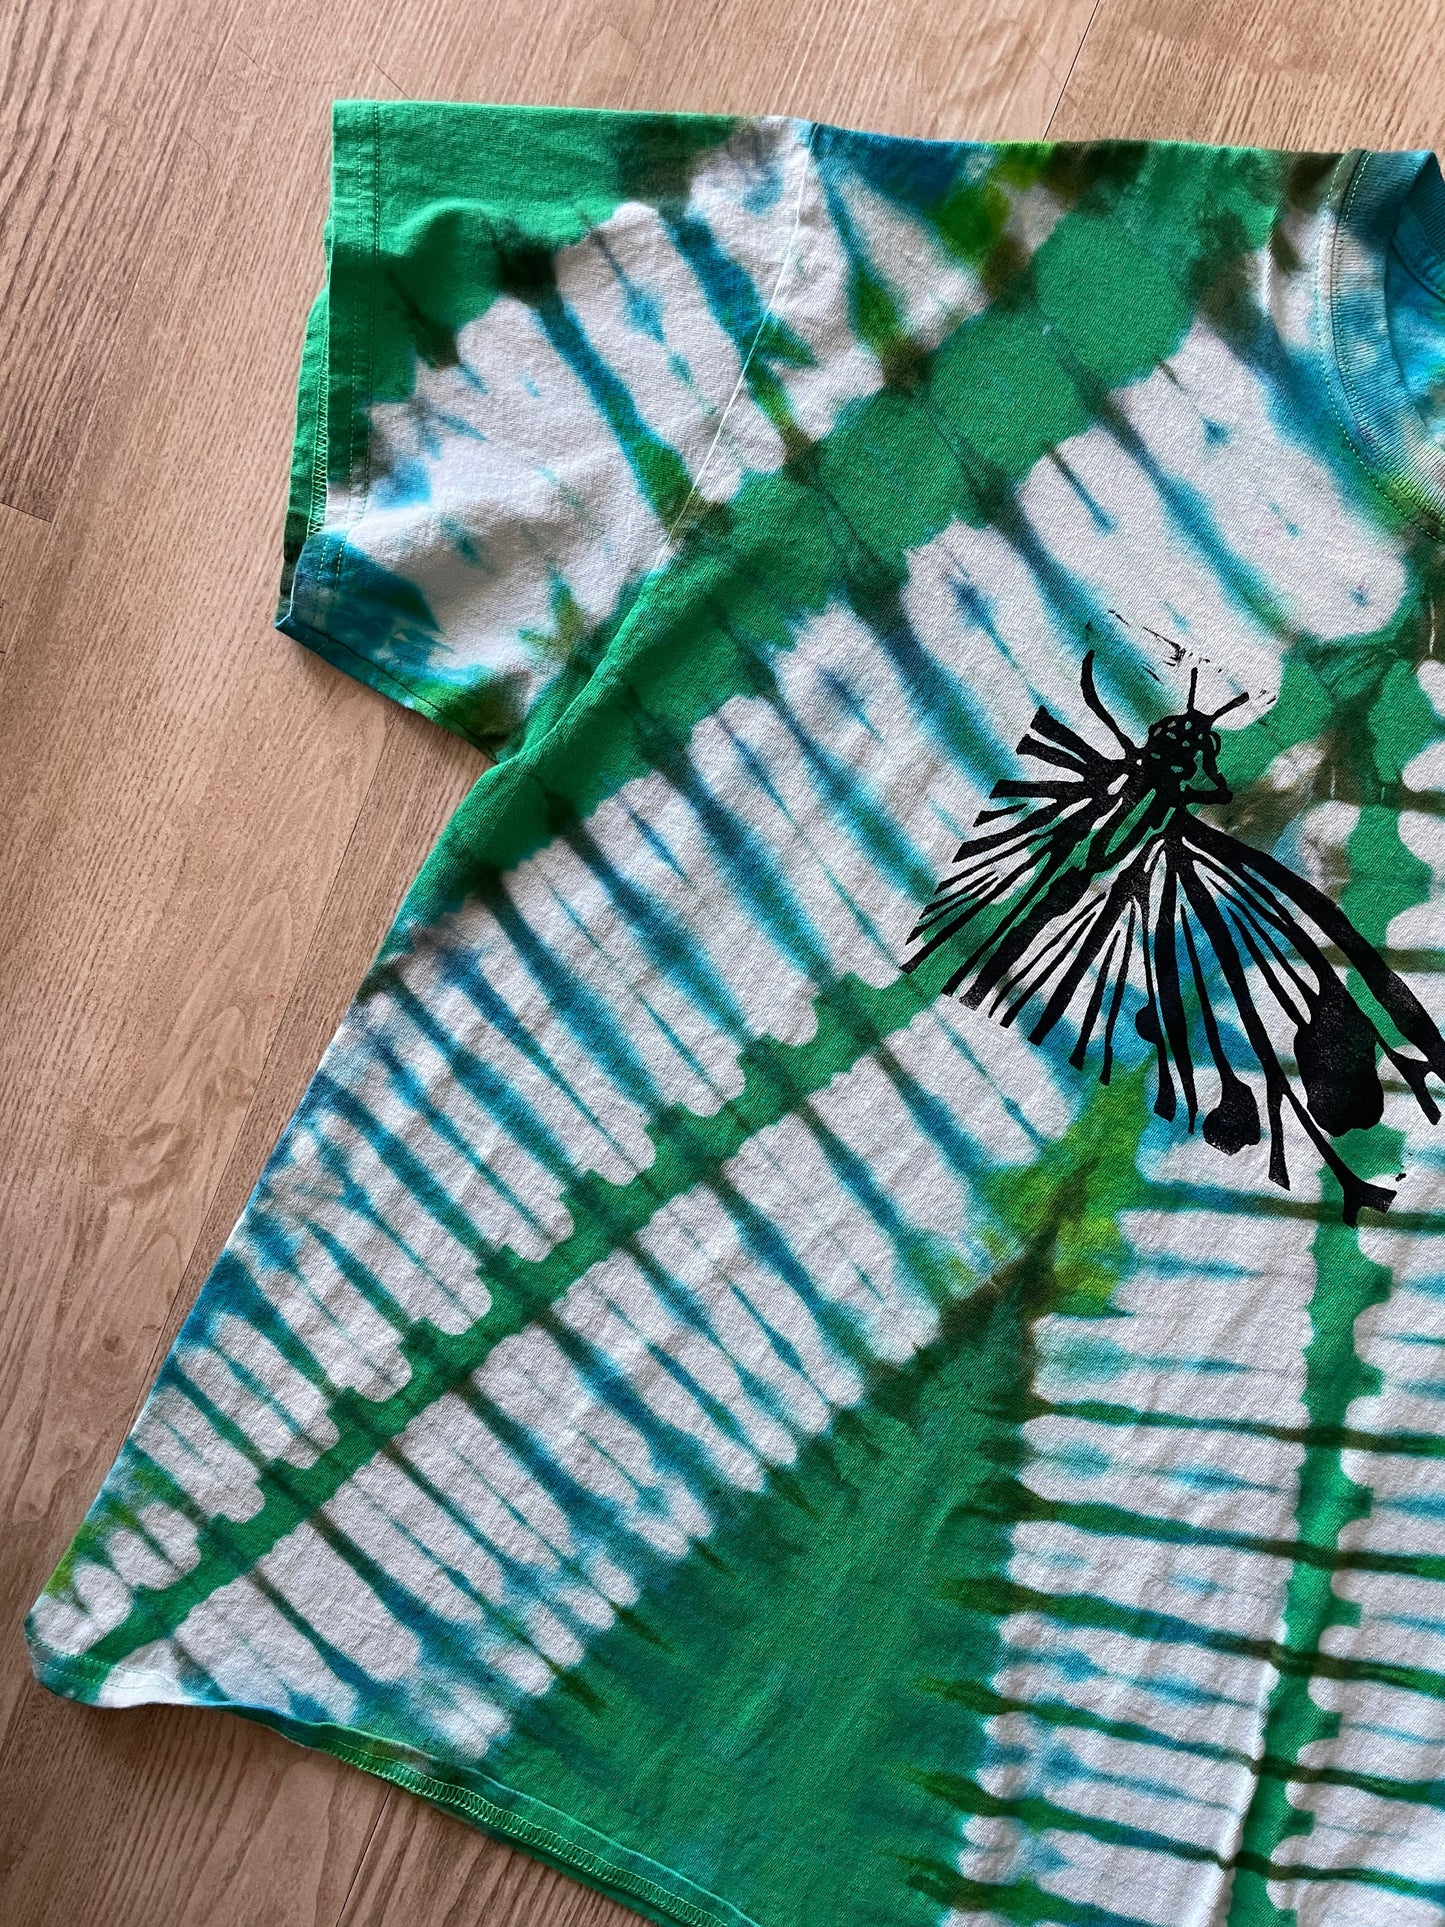 XL Men's Hand-Printed Butterfly Reverse Tie Dye Short Sleeve T-Shirt | Handmade One-Of-a-Kind Upcycled Green, Blue, and White Pleated Top